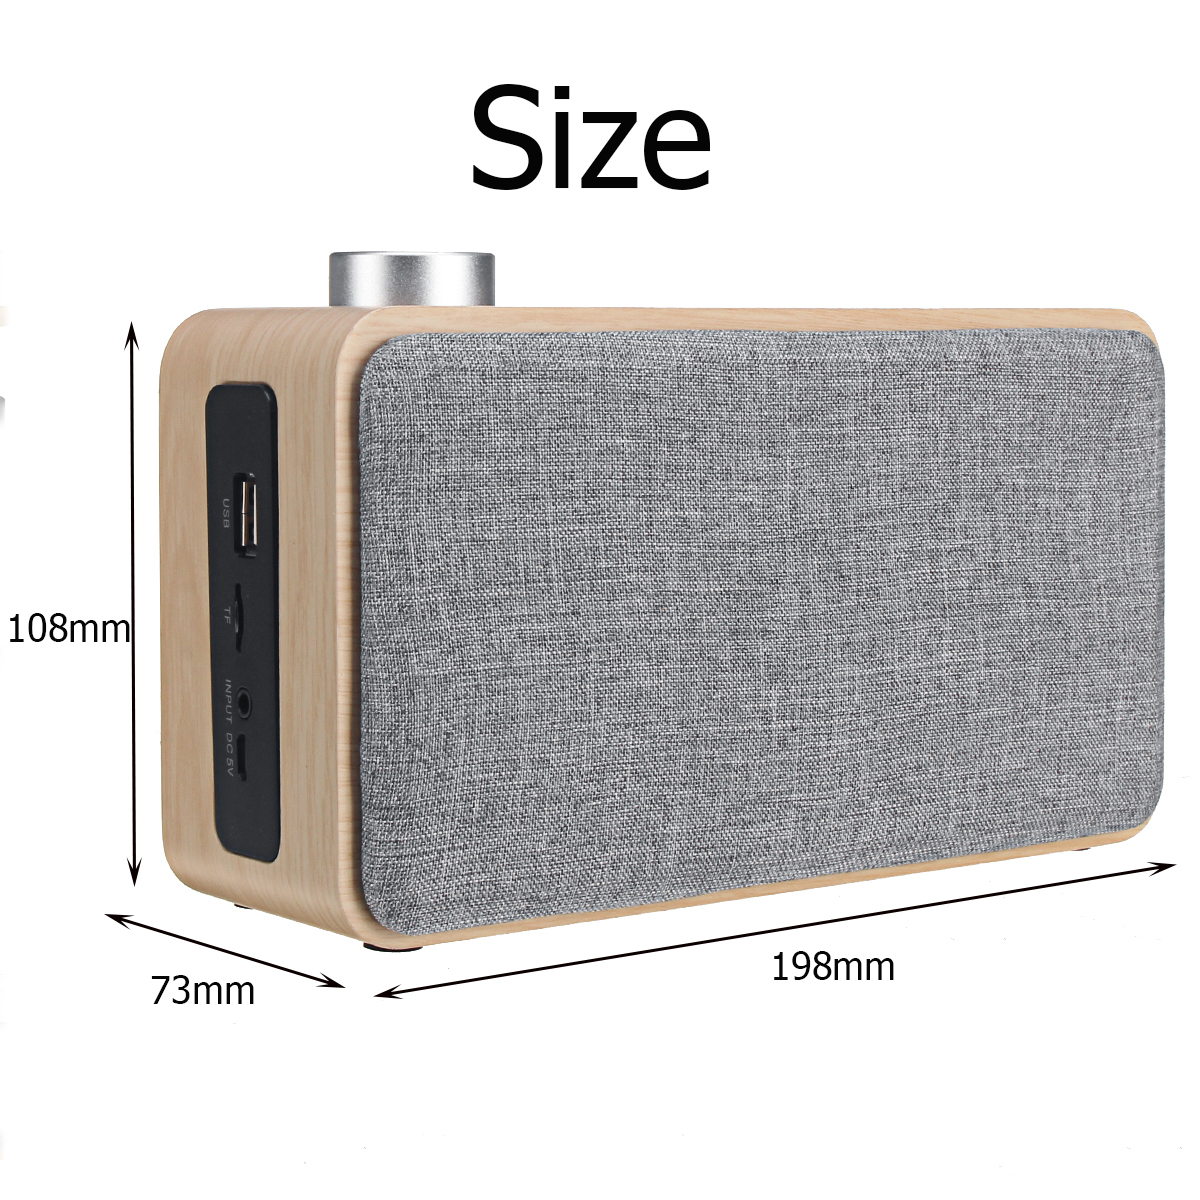 W5A-Wooden-Wireless-bluetooth-Speaker-Portable-Stereo-TF-Card-U-Disk-35mm-Audio-Speaker-with-Mic-1526315-8